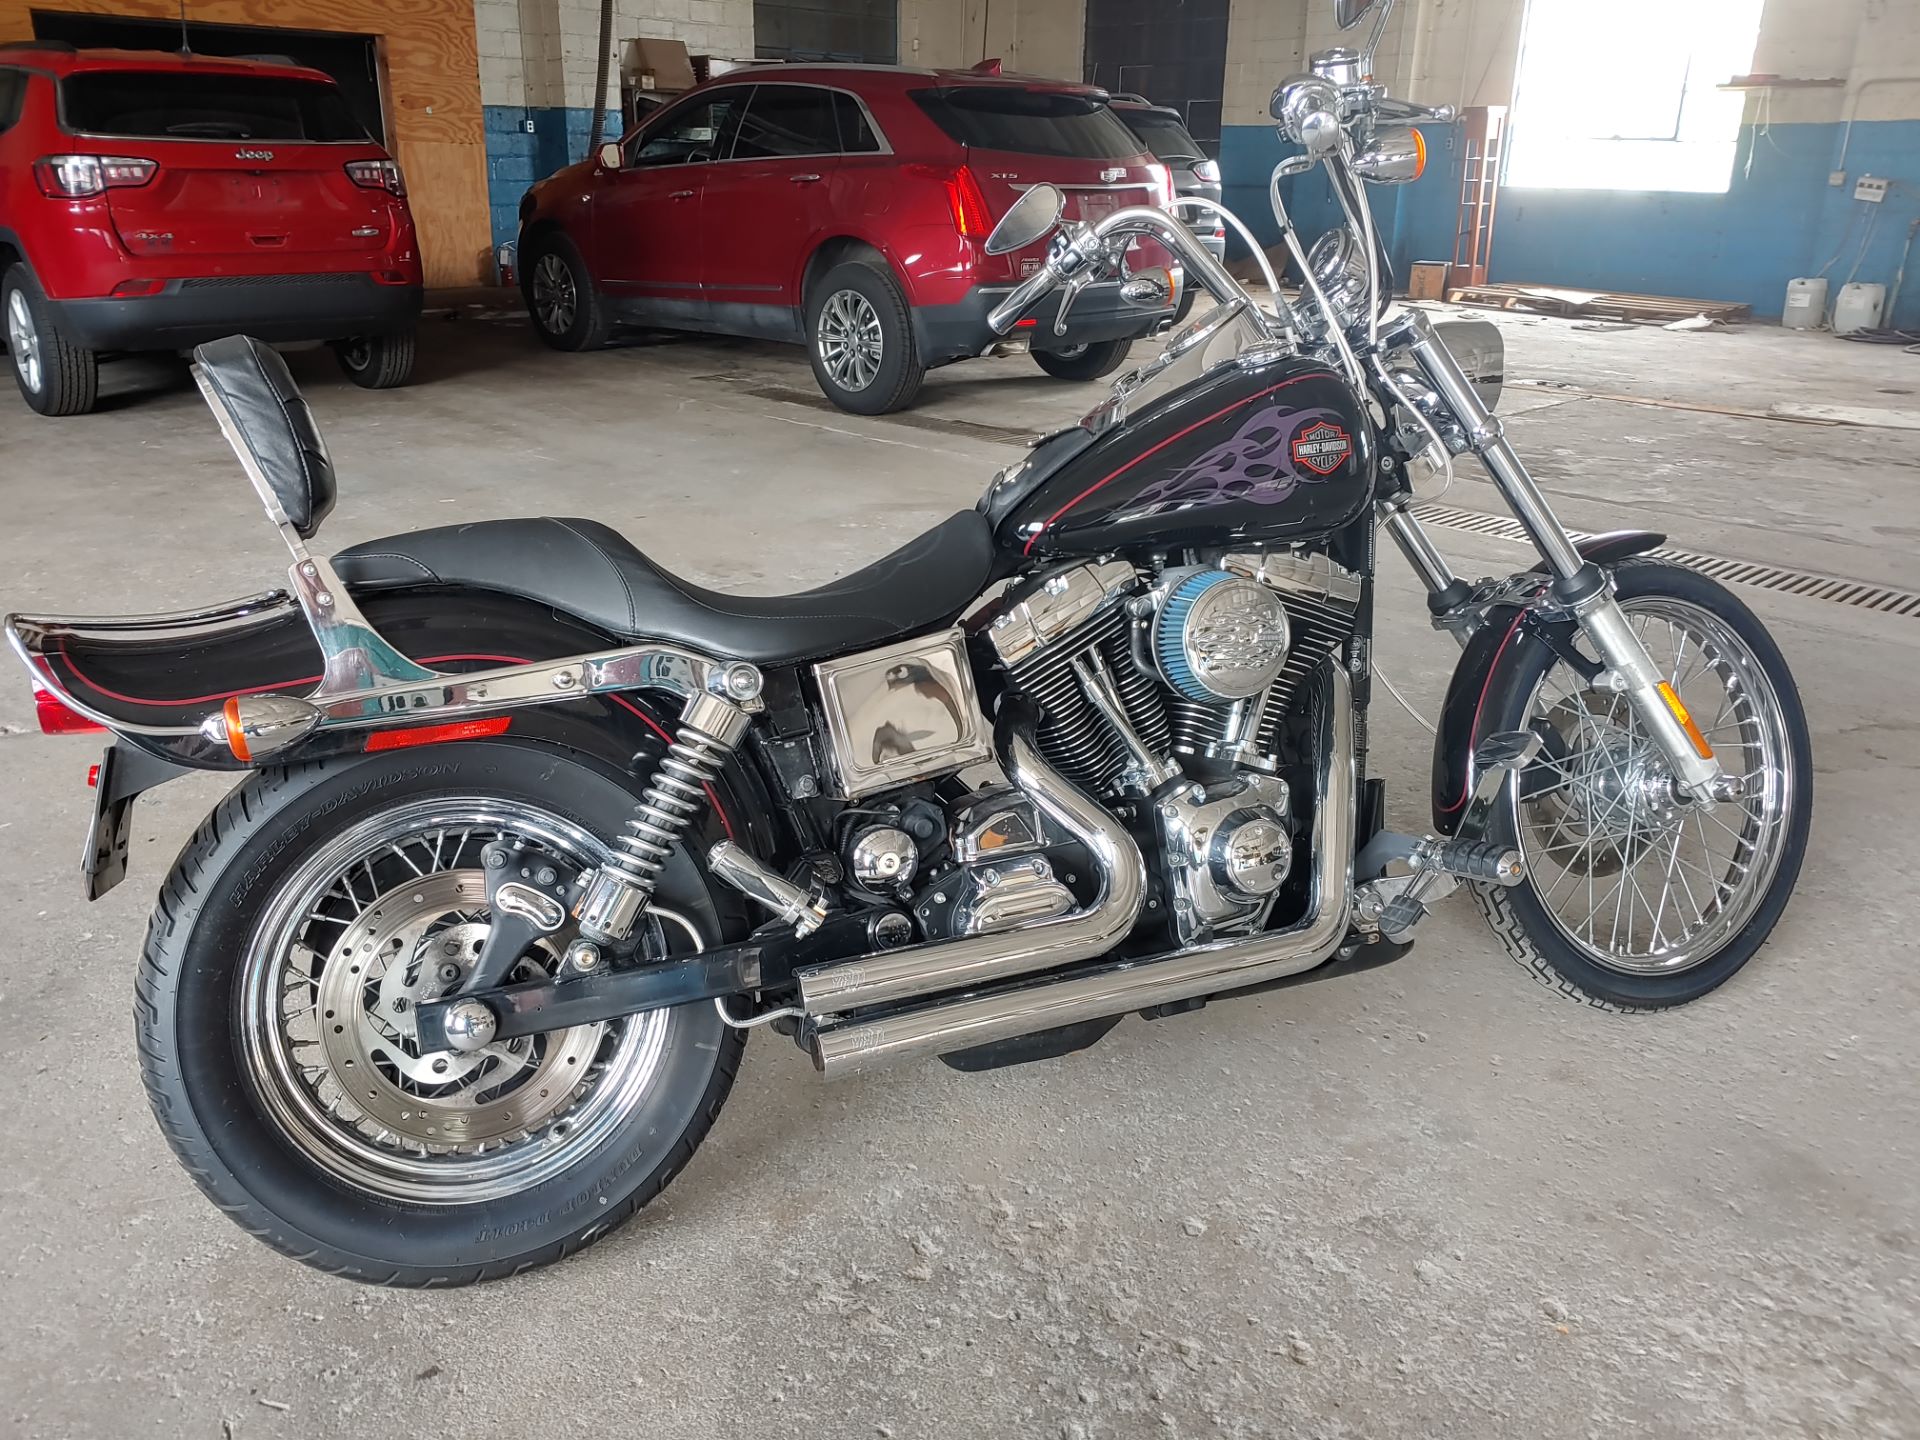 Used 2002 Harley Davidson Fxdwg Dyna Wide Glide Motorcycles In Liberty Ny Har314955 Vivid Black